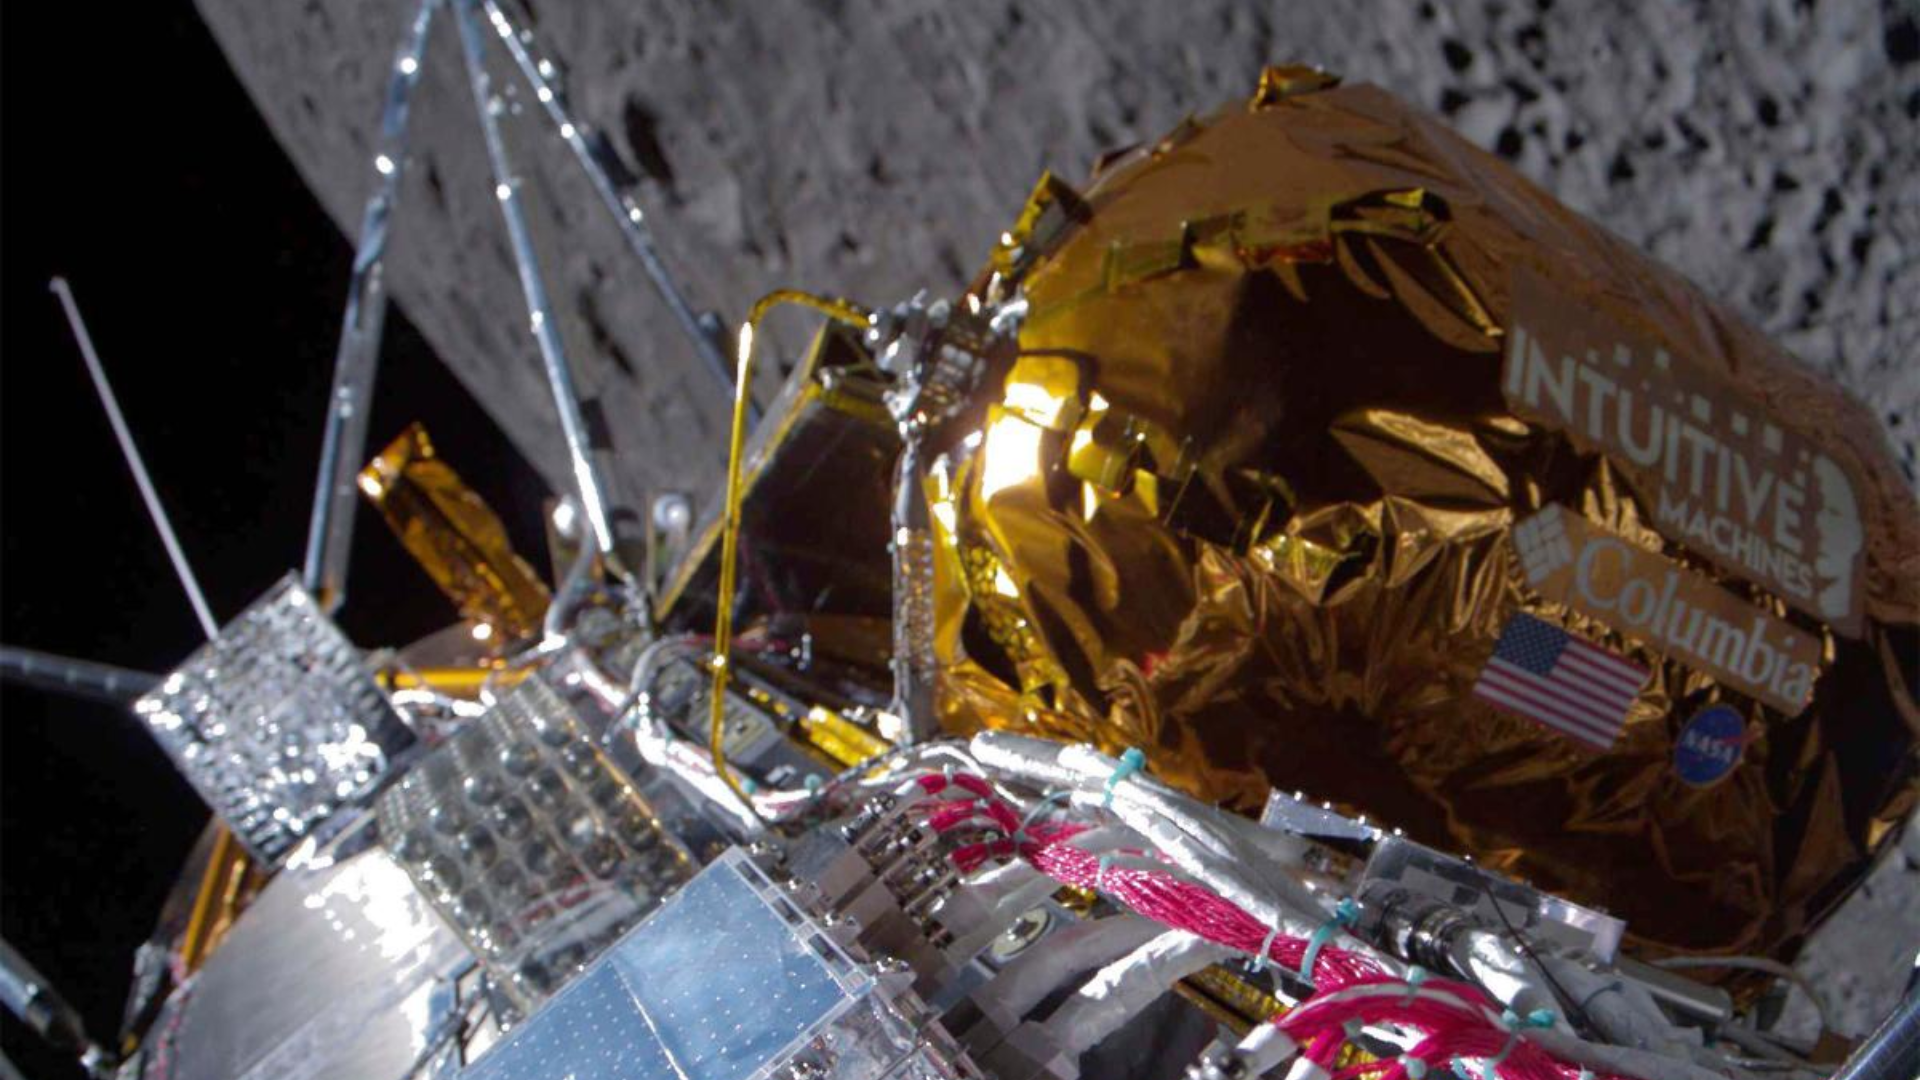 America’s Odysseus Spacecraft makes first commercial moon landing